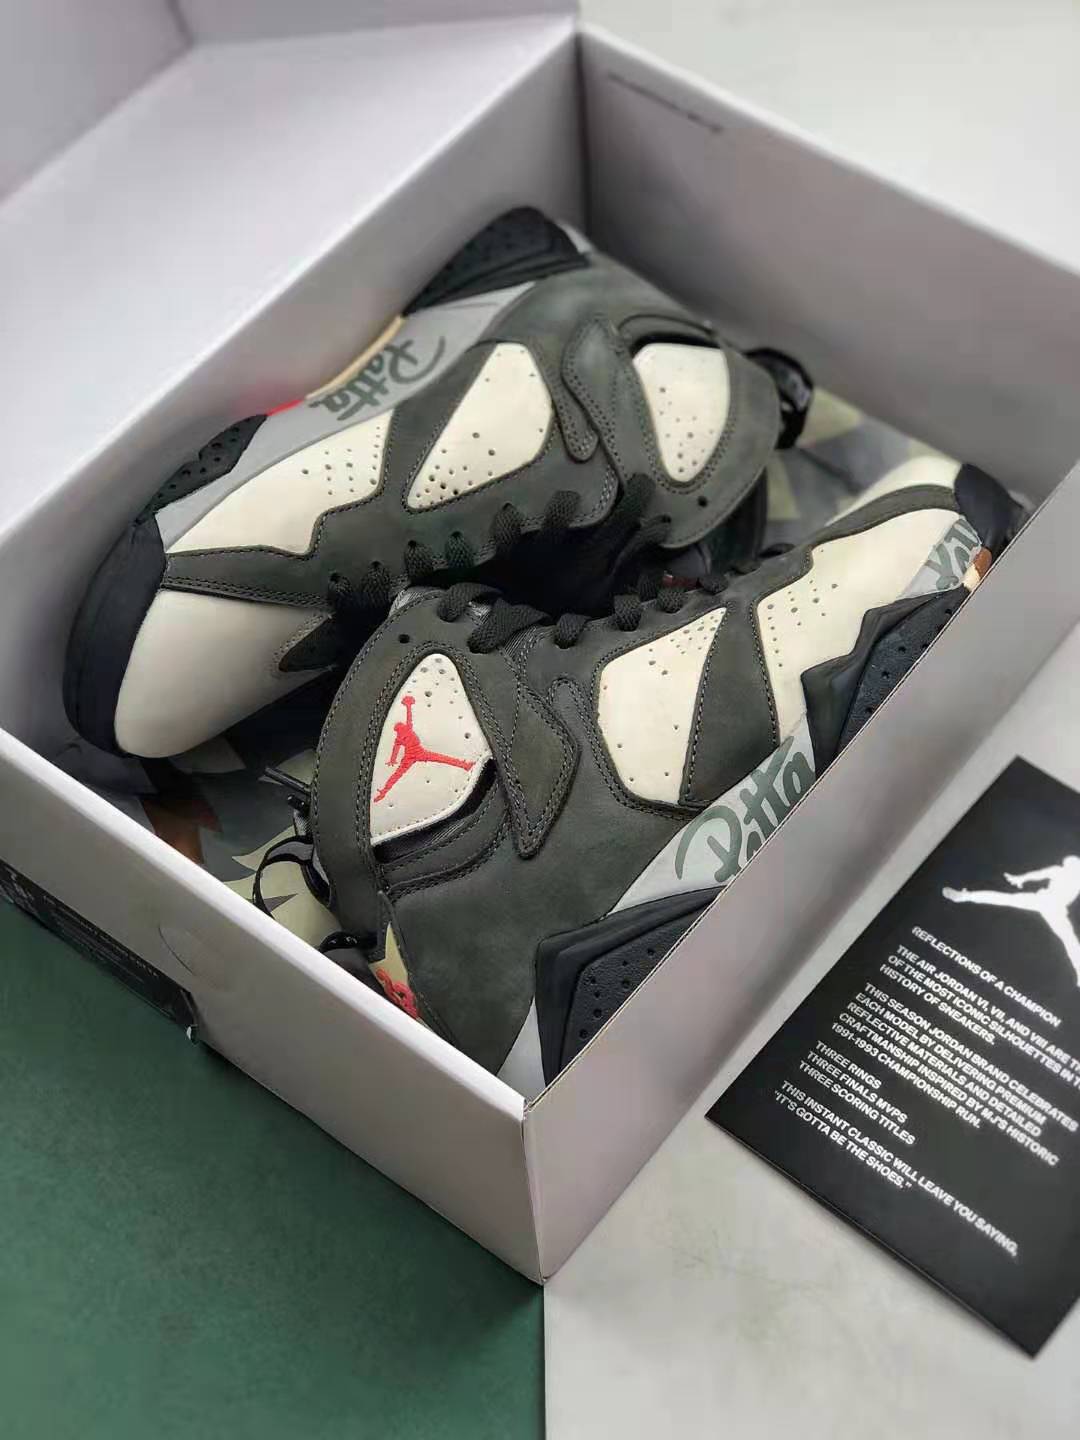 Patta x Air Jordan 7 Retro SP 'Icicle' AT3375-100 | Limited Edition Collaboration